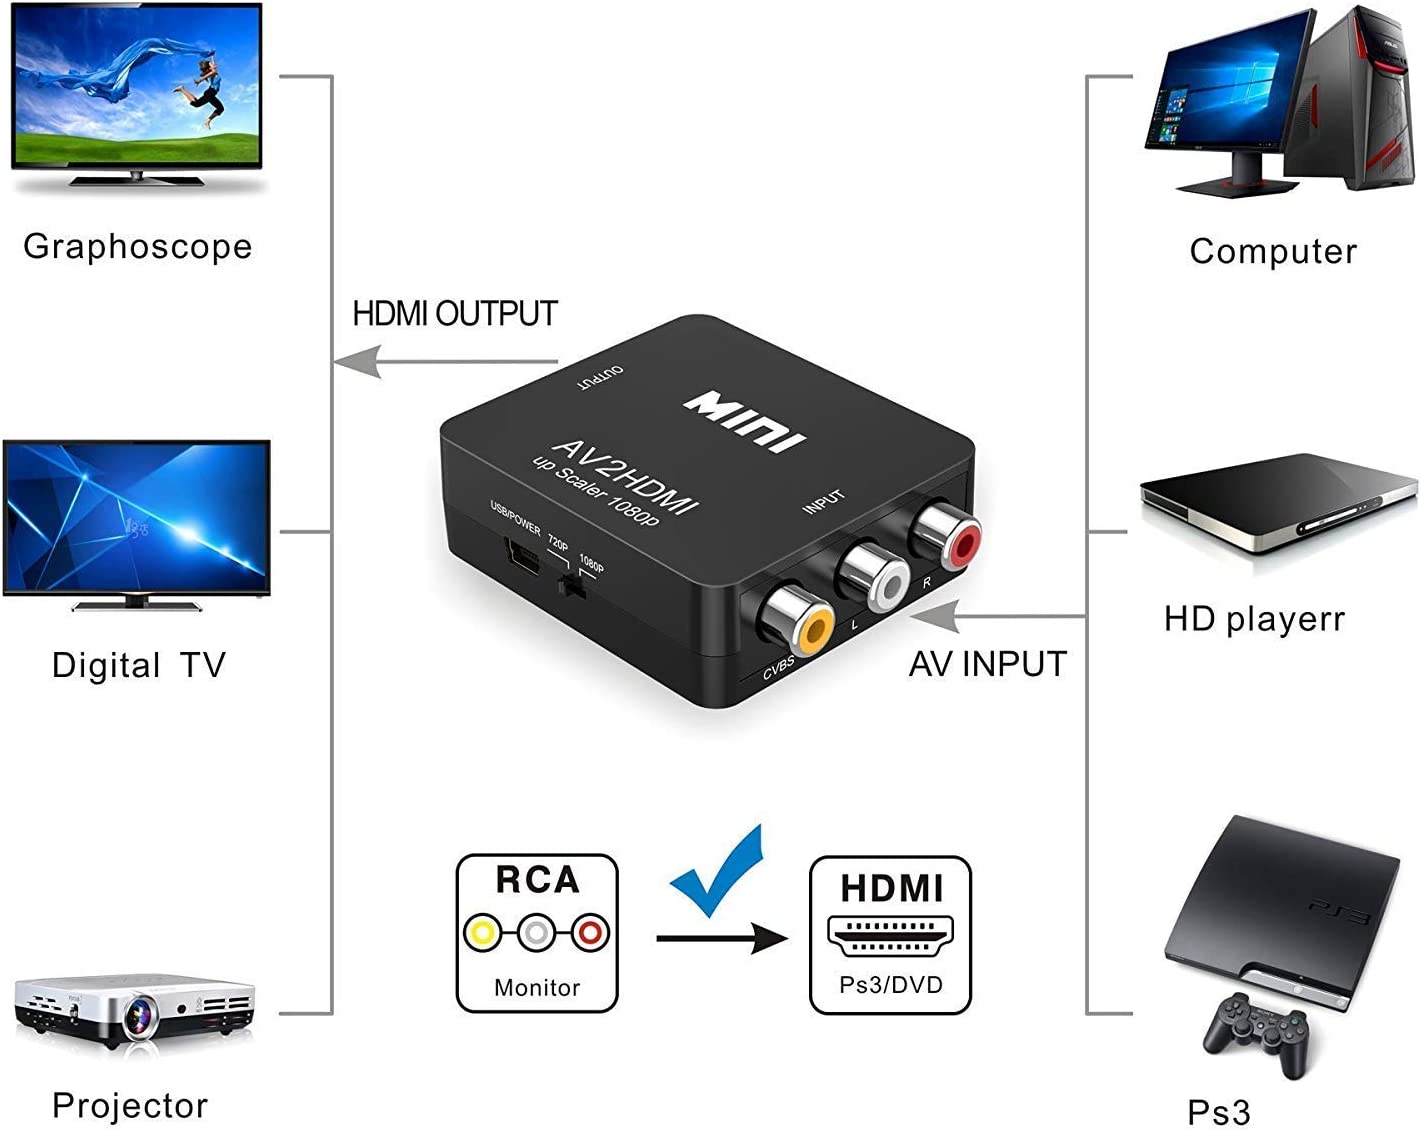 ABLEWE RCA to HDMI,AV to HDMI Converter, 1080P Mini RCA Composite CVBS Video Audio Converter Adapter Supporting PAL/NTSC for TV/PC/ PS3/ STB/Xbox VHS/VCR/Blue-Ray DVD Players